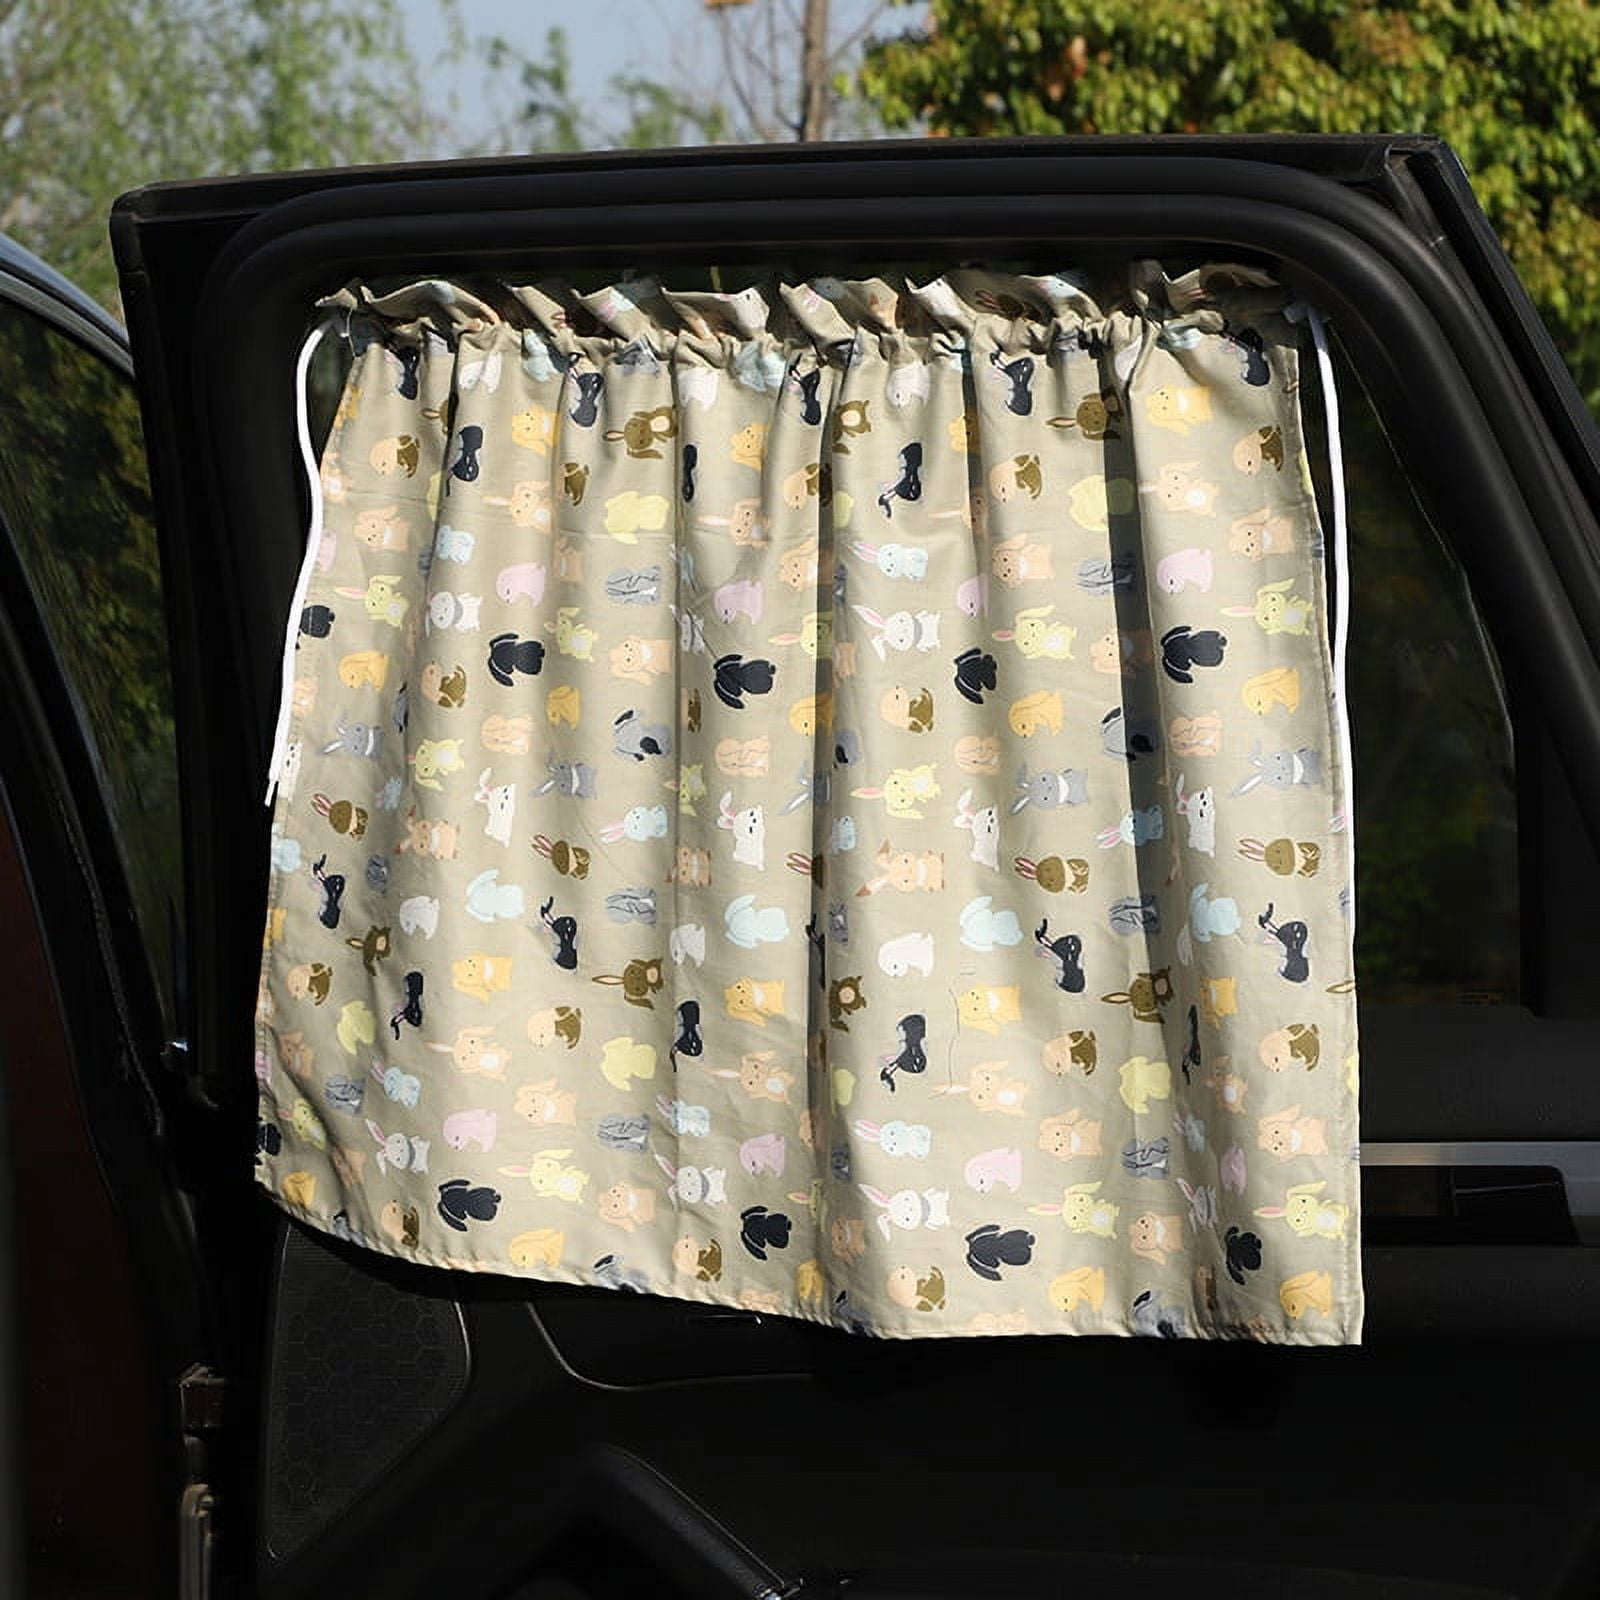 Cotton Car Curtains/ Shade for Babies With Suction Cups Curtain